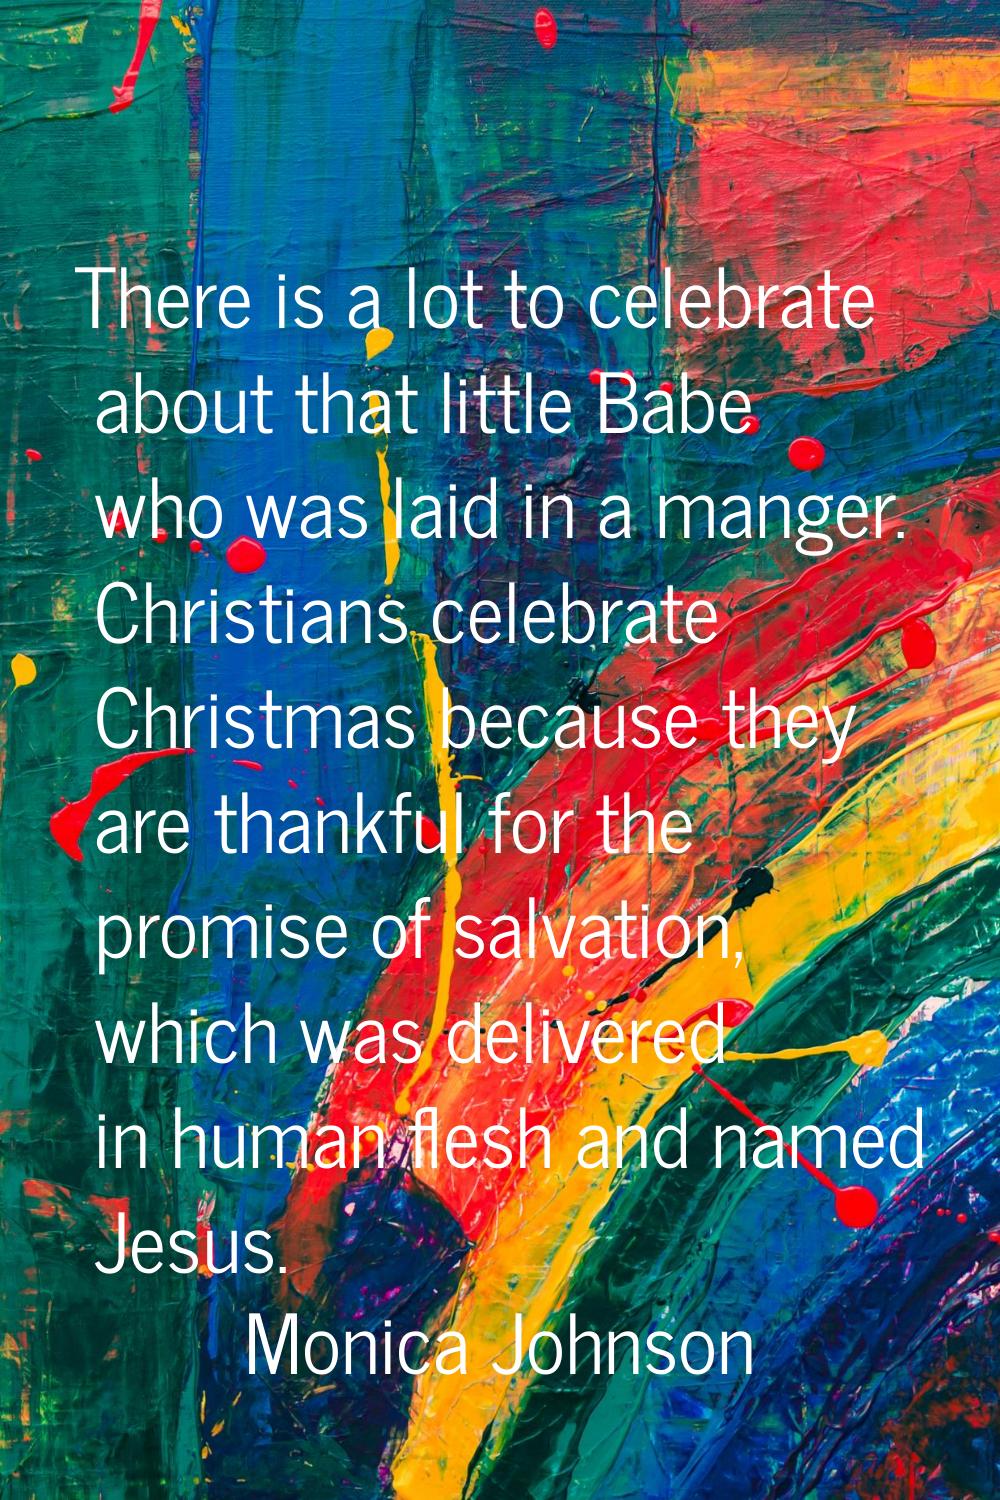 There is a lot to celebrate about that little Babe who was laid in a manger. Christians celebrate C